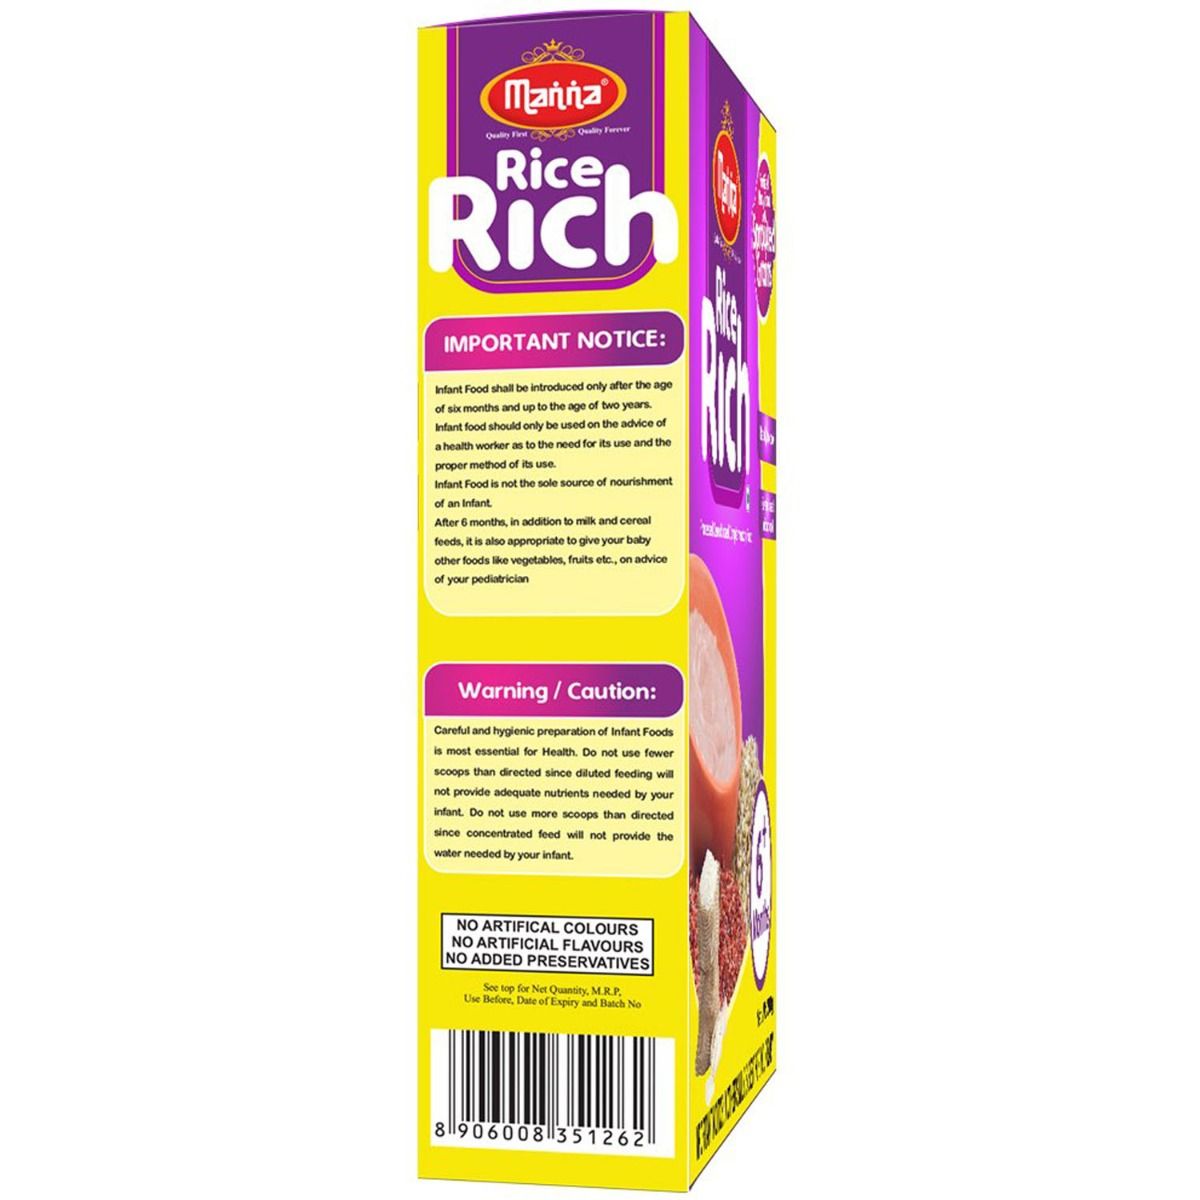 Manna Rice Rich Baby Cereal 6+Months, 200 gm Refill Pack, Pack of 1 